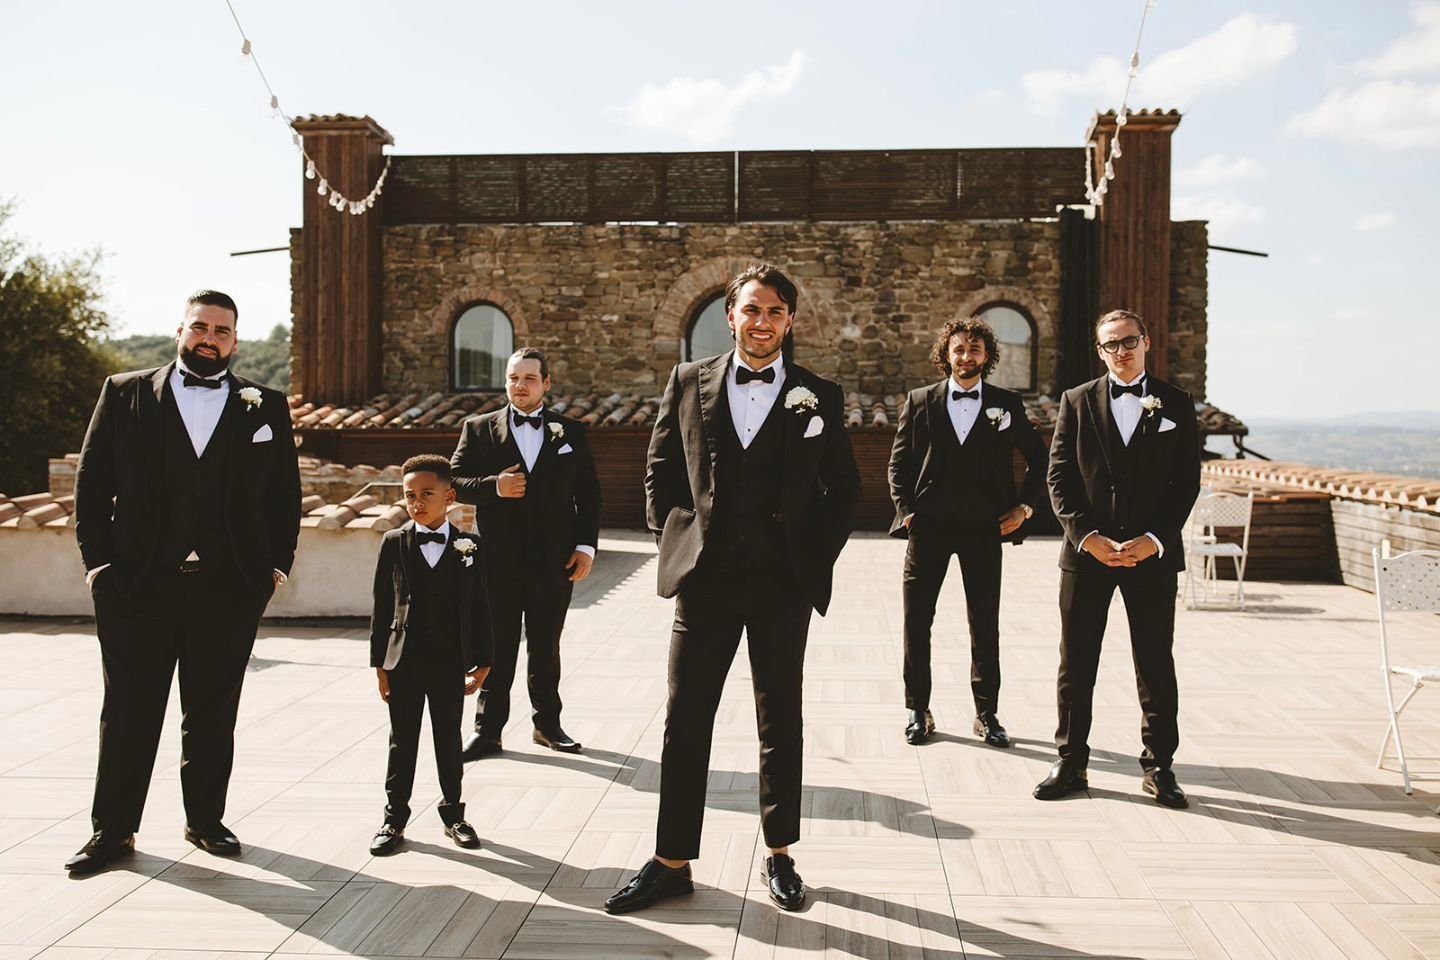 Just cuteness!

No need of any caption here.
It speaks for itself! Throw lots of hearts to this one!

Photo @moko_photography 
Venue @castellodirosciano 

#groomsmen #groomsmenstyle #weddingboys